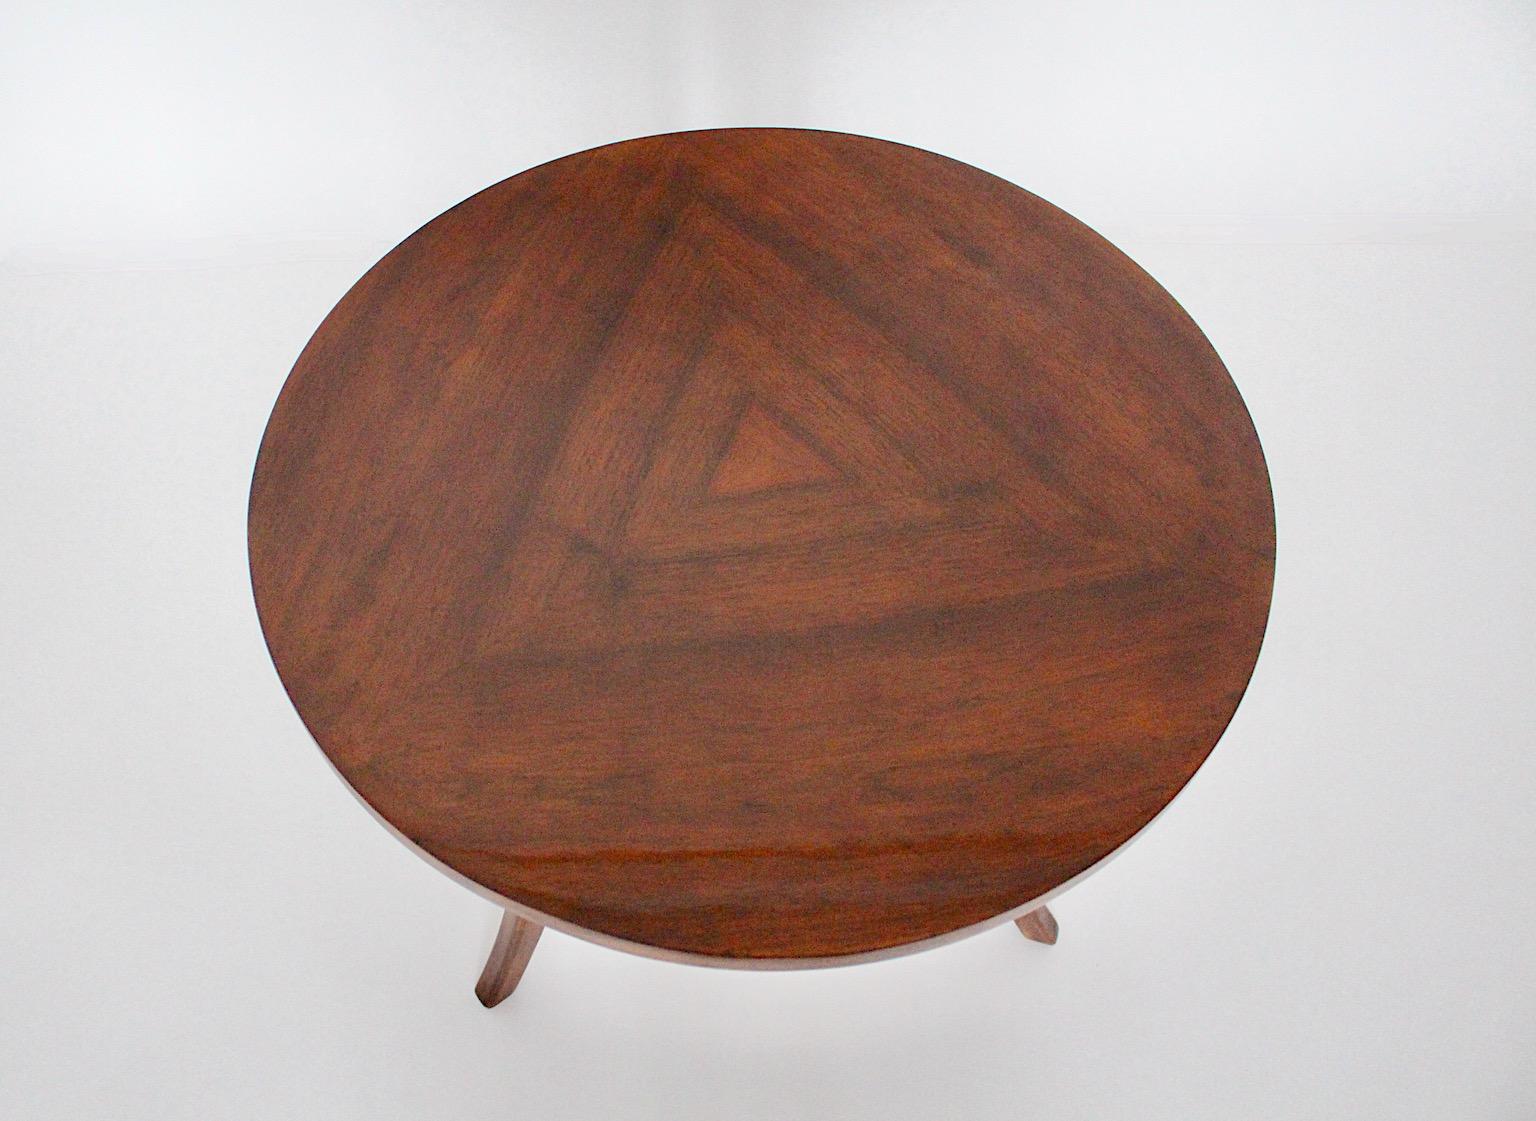 Mid-20th Century Art Deco Walnut Brown Vintage Coffee Table Side Table Josef Frank, 1930s, Vienna For Sale